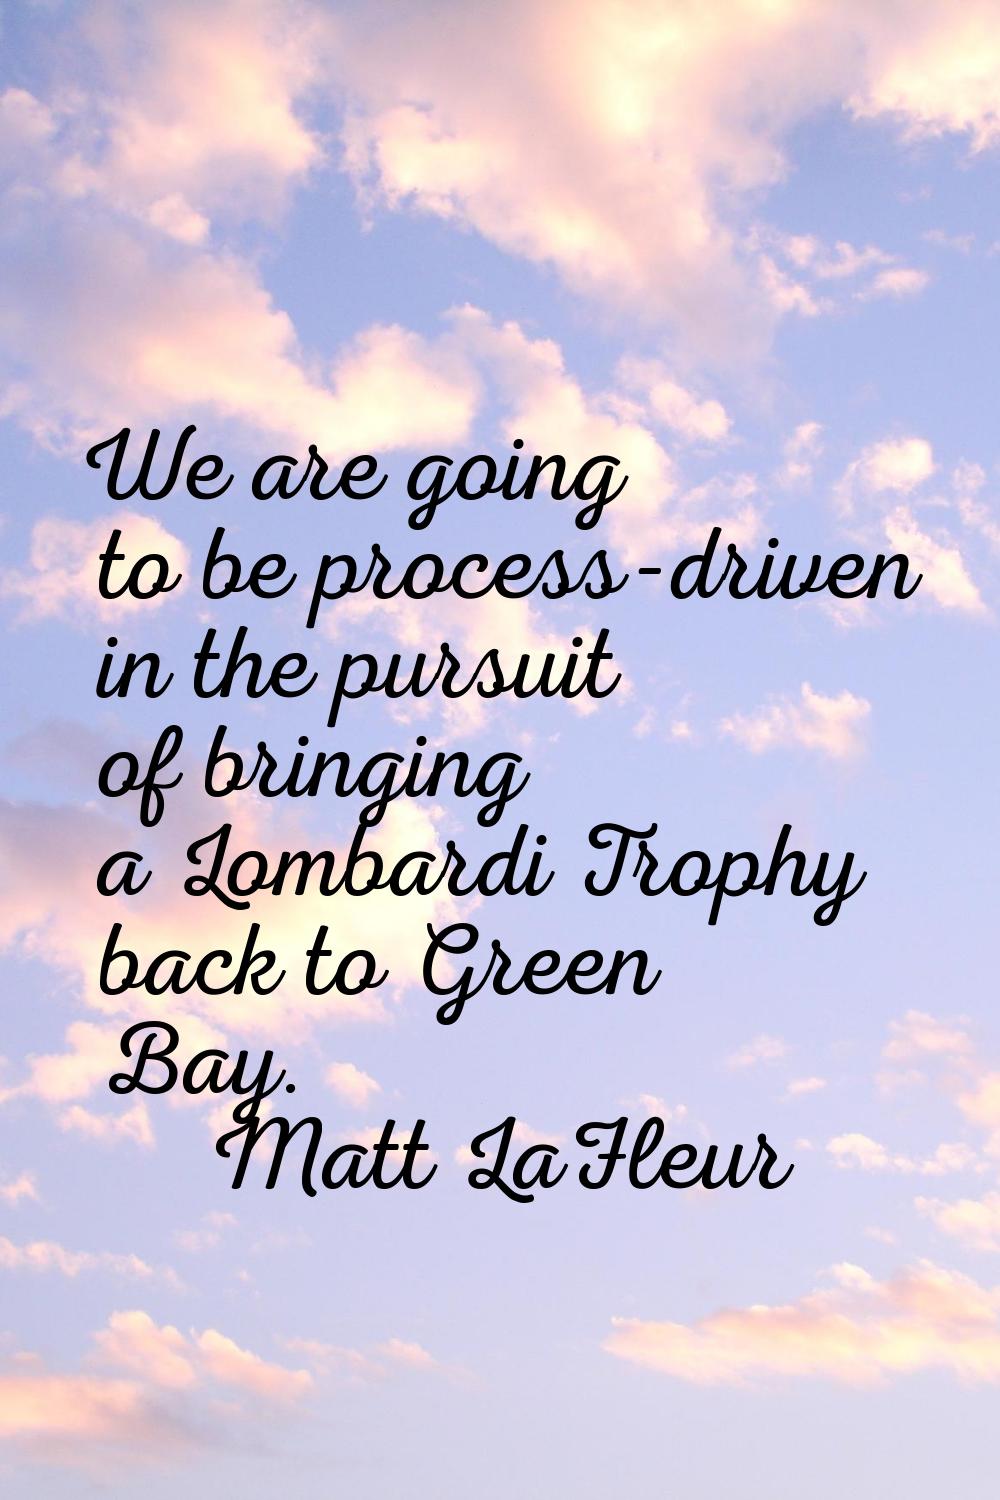 We are going to be process-driven in the pursuit of bringing a Lombardi Trophy back to Green Bay.